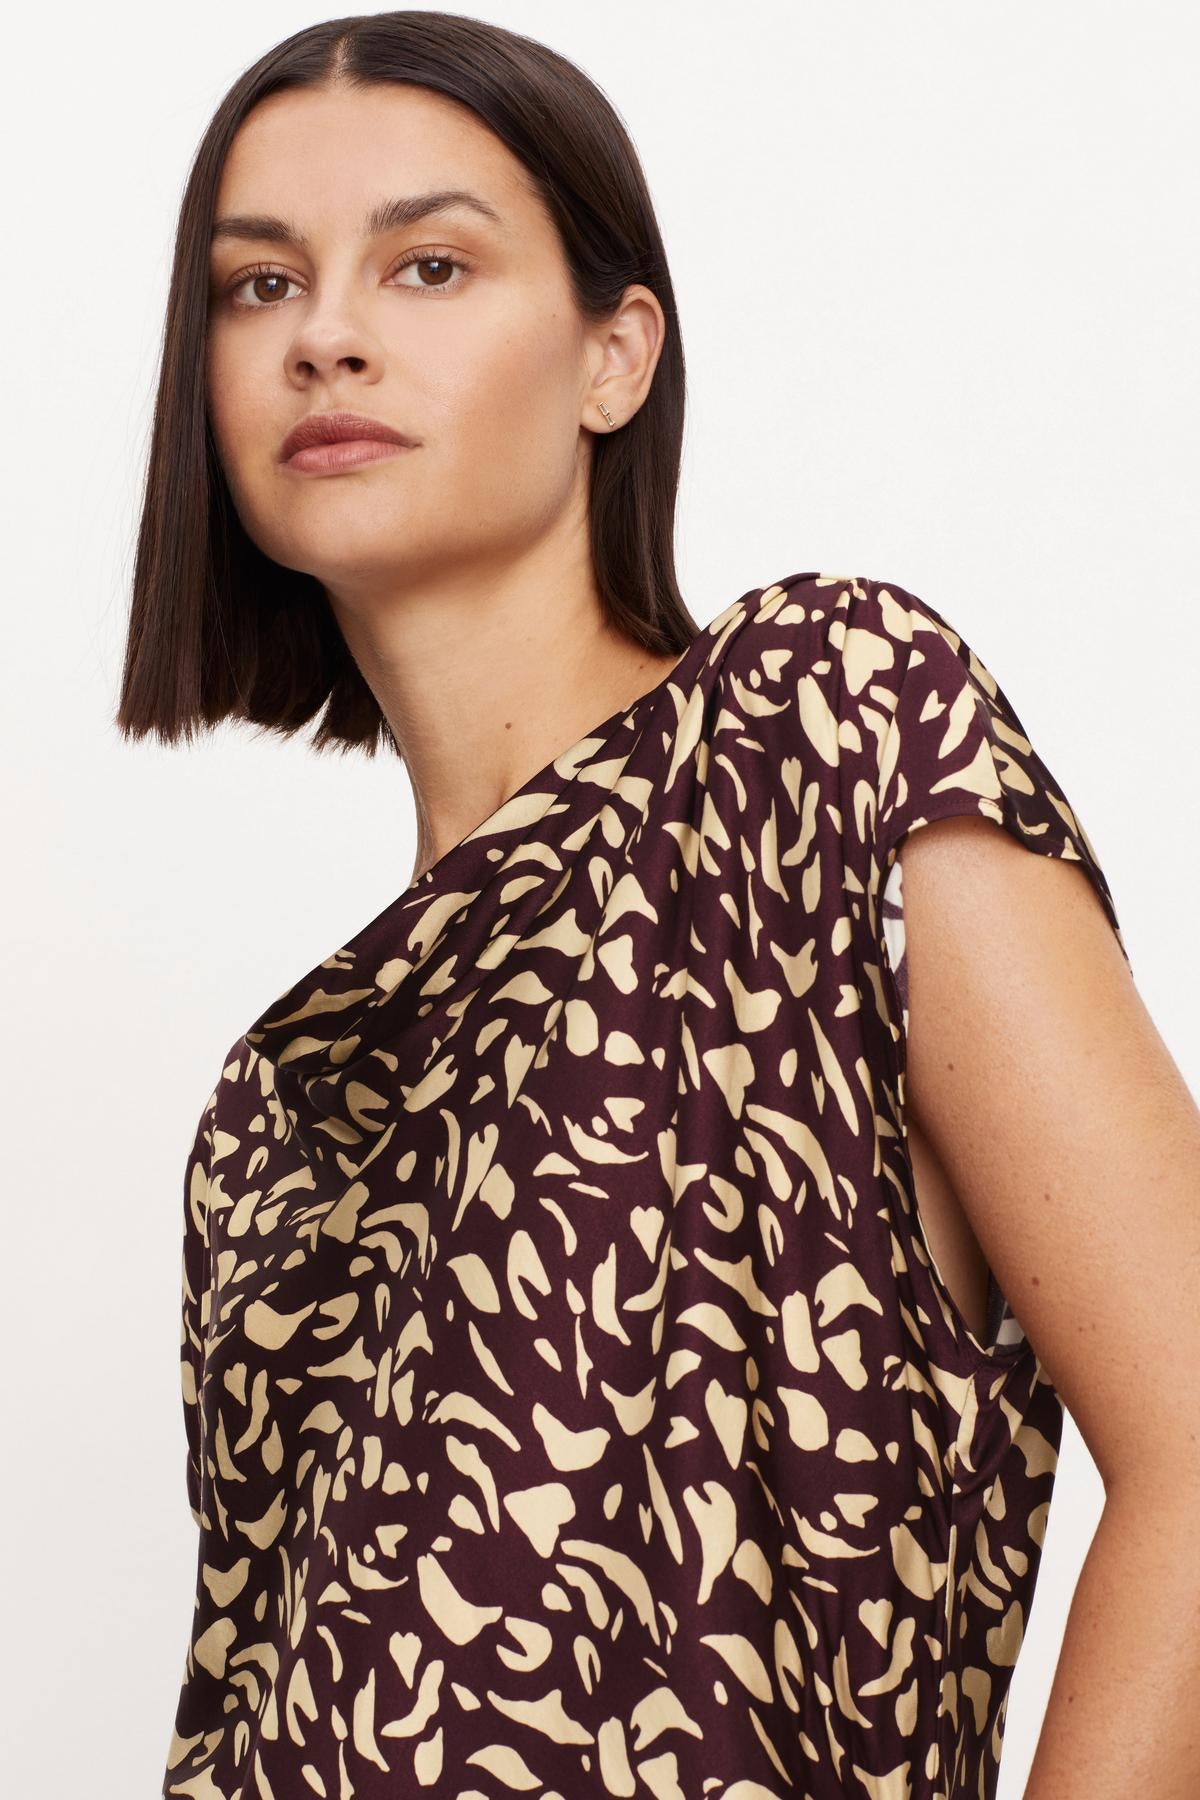 The model is wearing a DEVI PRINTED SATIN BLOUSE by Velvet by Graham & Spencer.-35696205398209